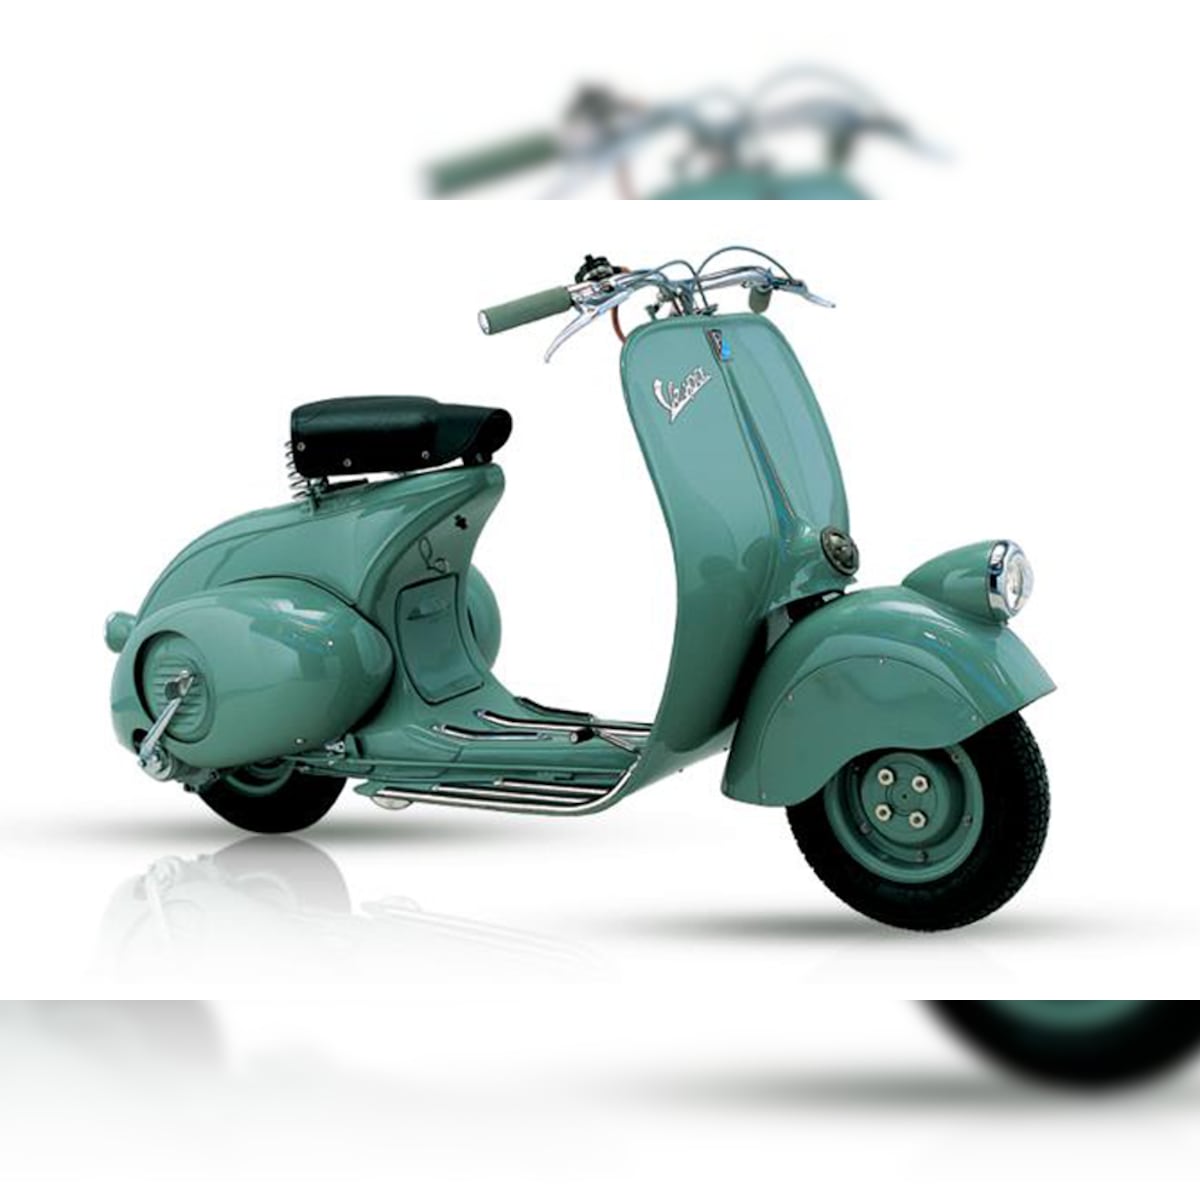 70 Years the Vespas Produced, Ever